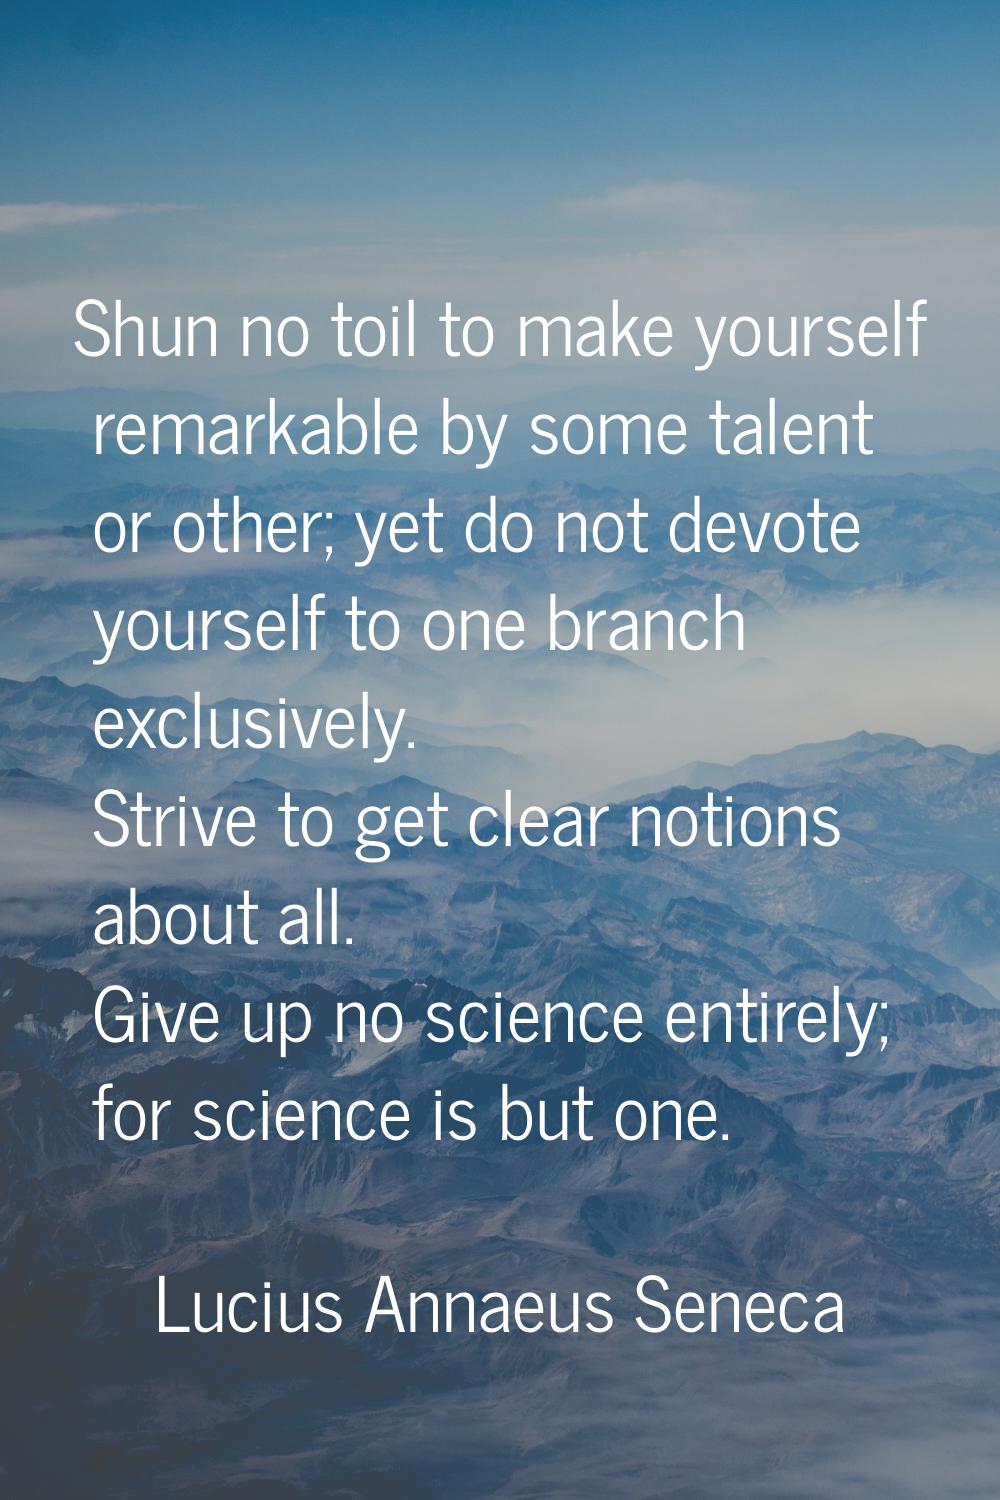 Shun no toil to make yourself remarkable by some talent or other; yet do not devote yourself to one